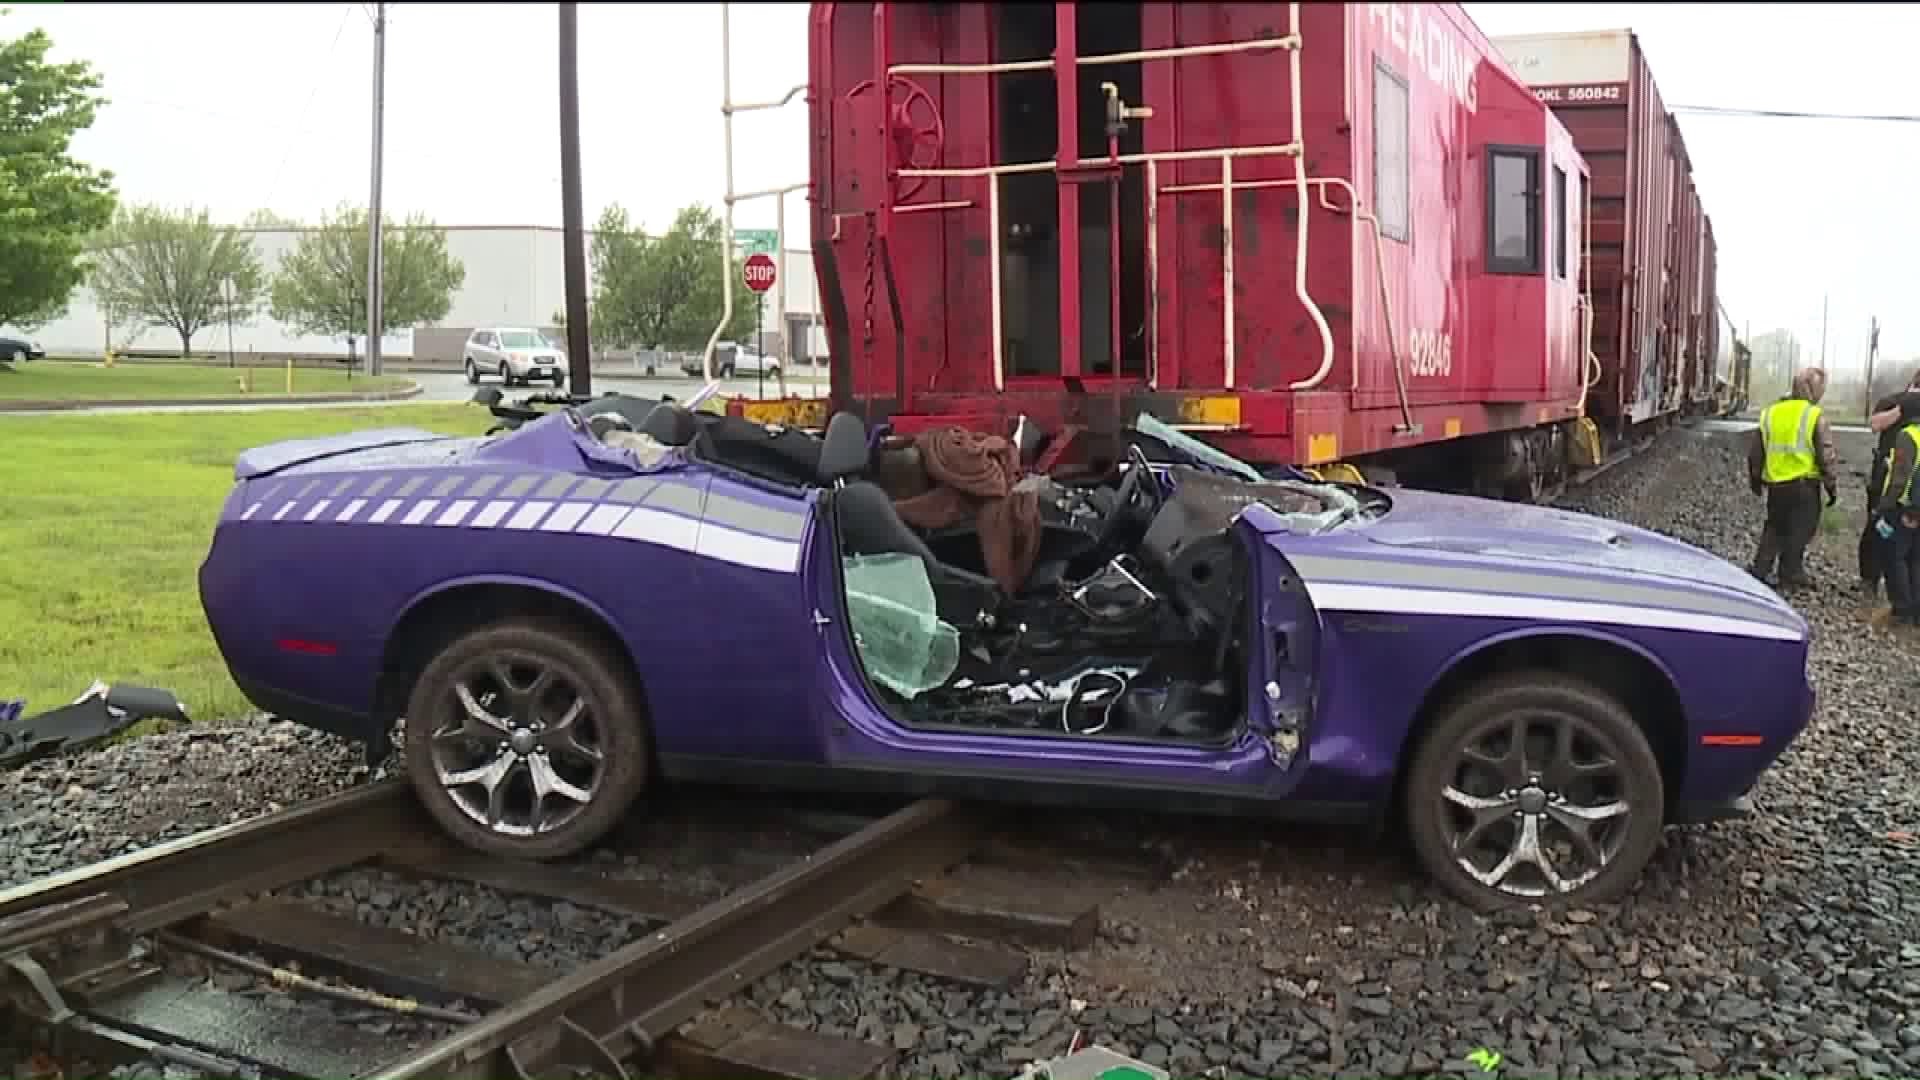 Driver Injured in Collision with Train in Luzerne County